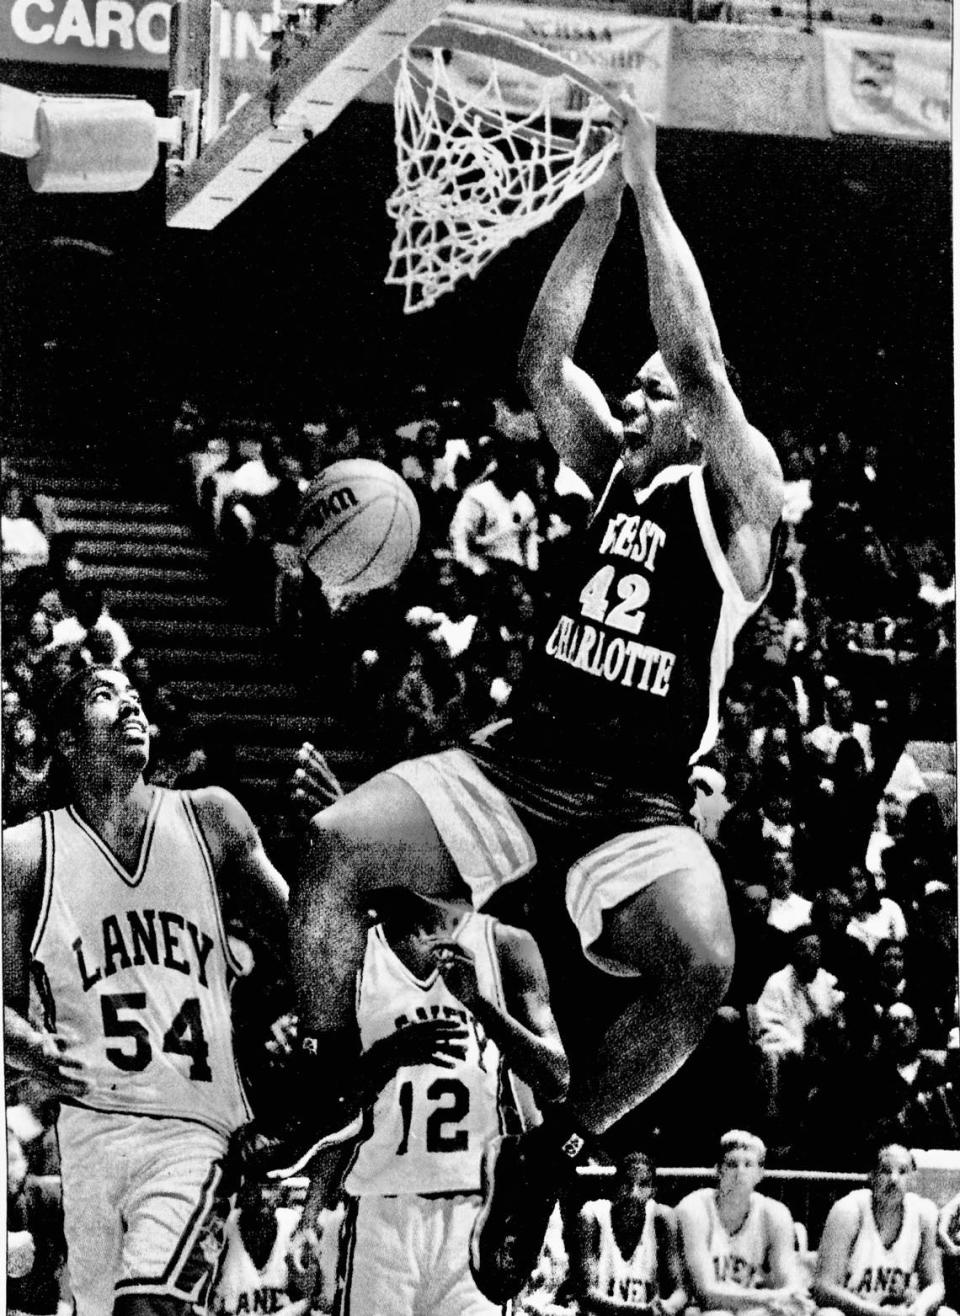 In the 1999 state final, West Charlotte Jason Parker scored 38 points and was named championship MVP.